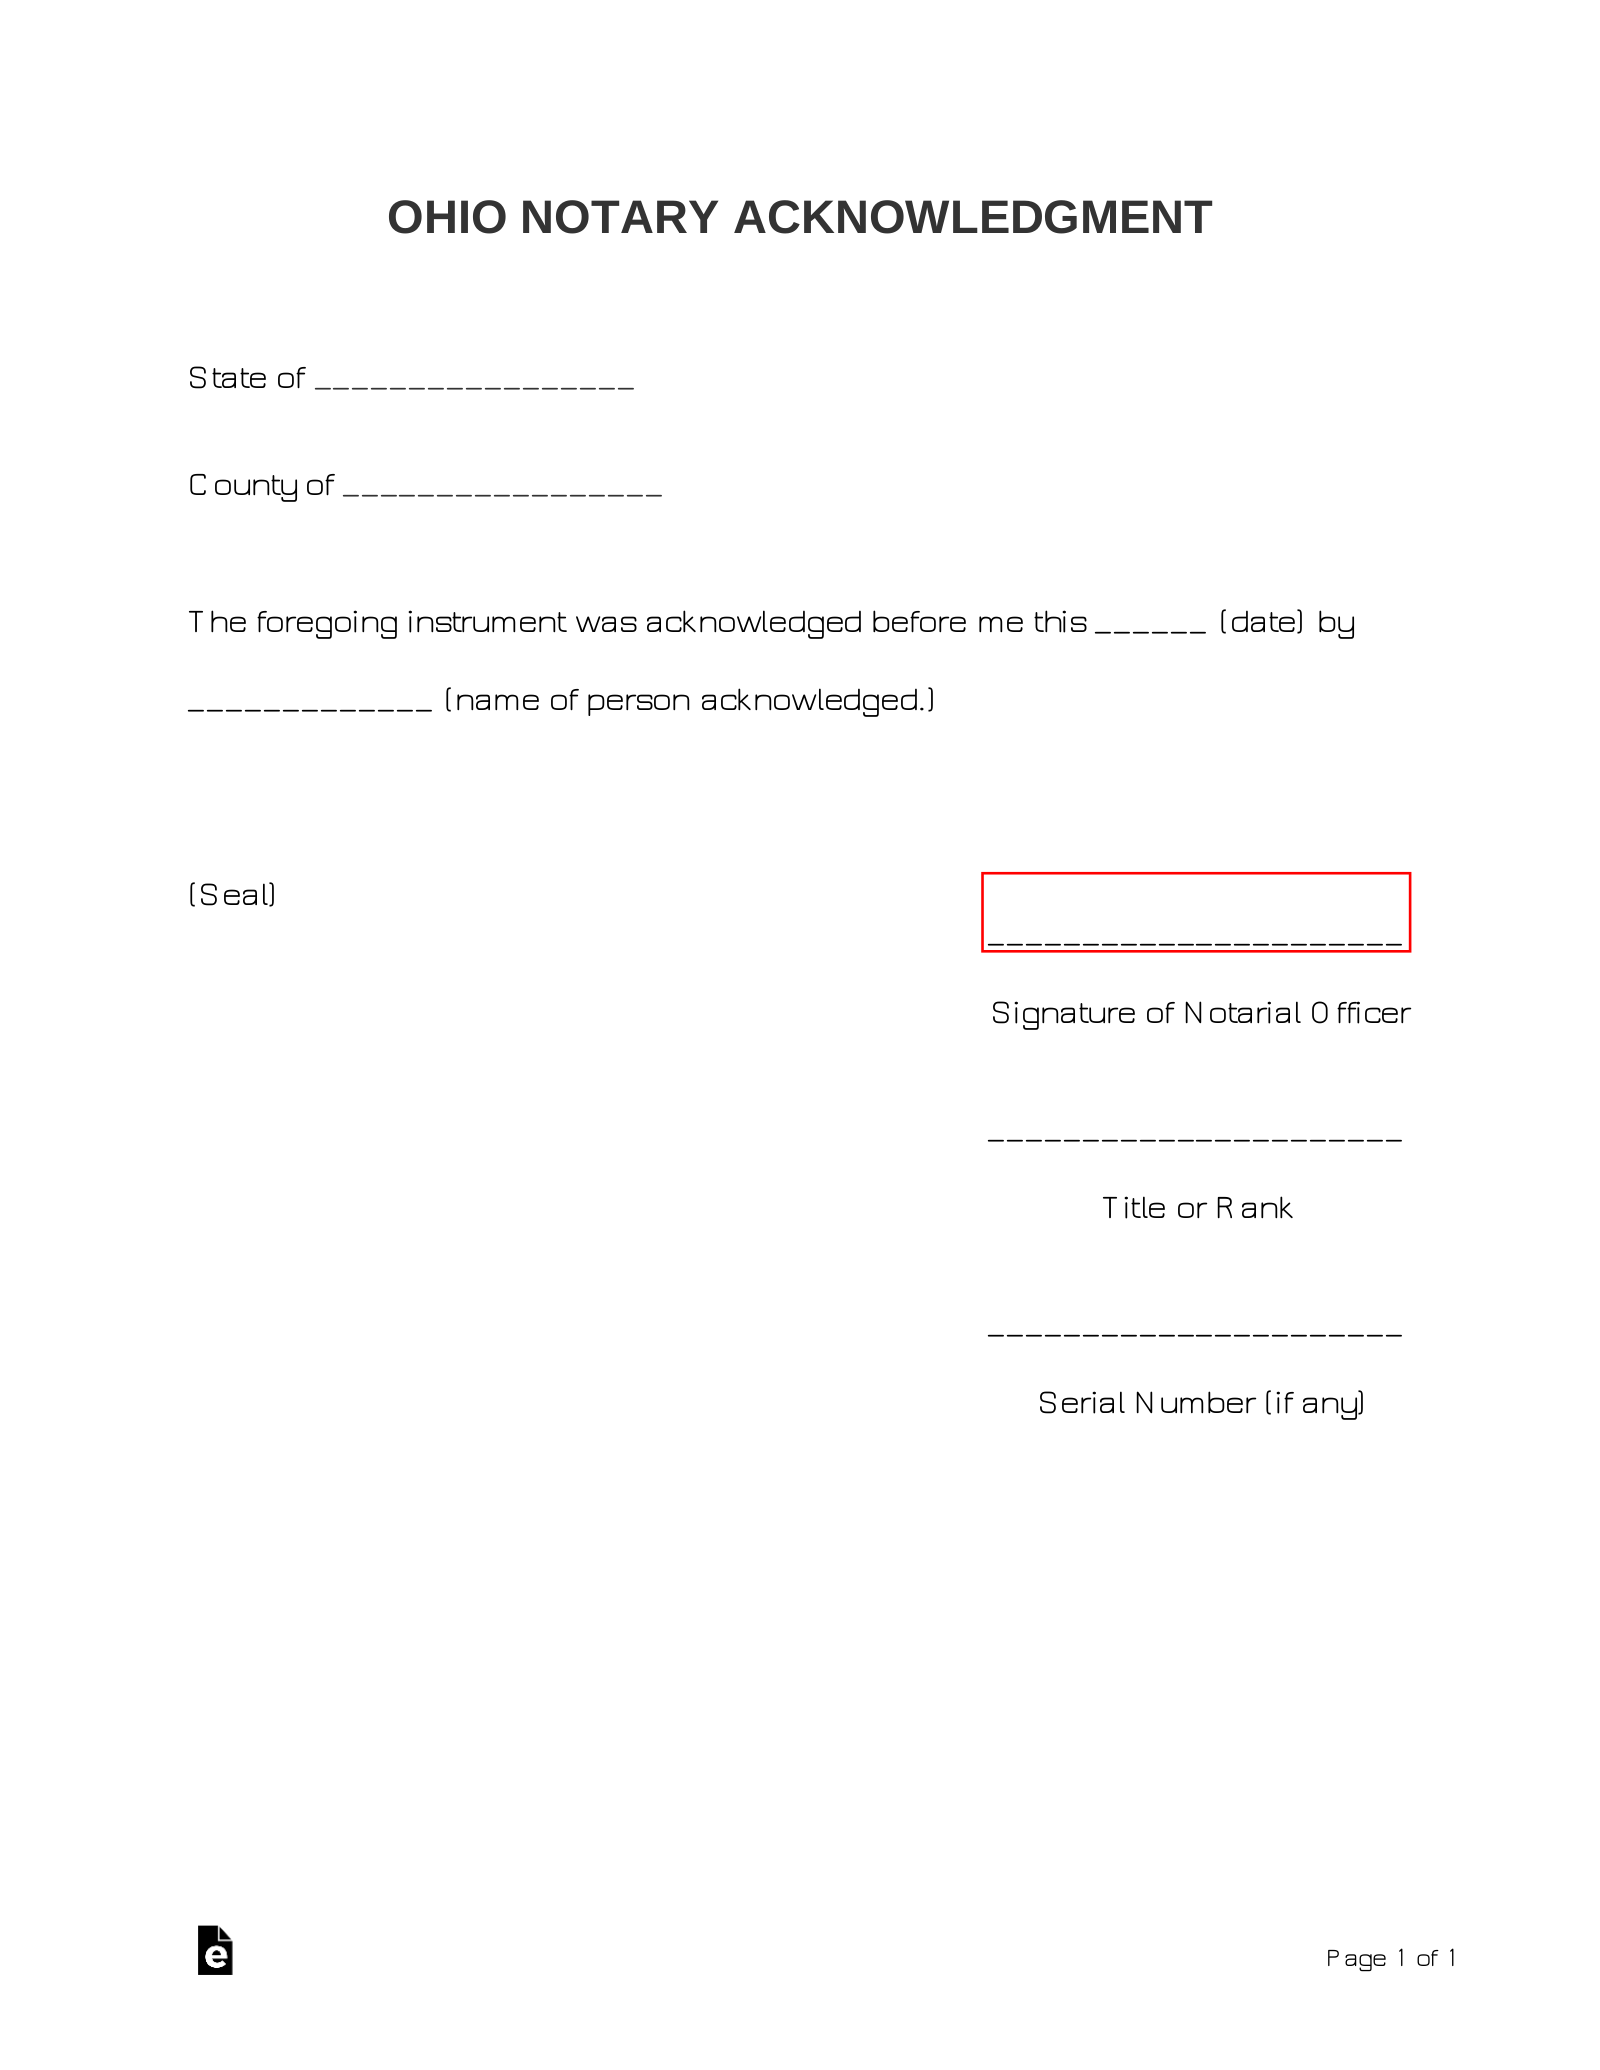 Ohio Notary Acknowledgment Form